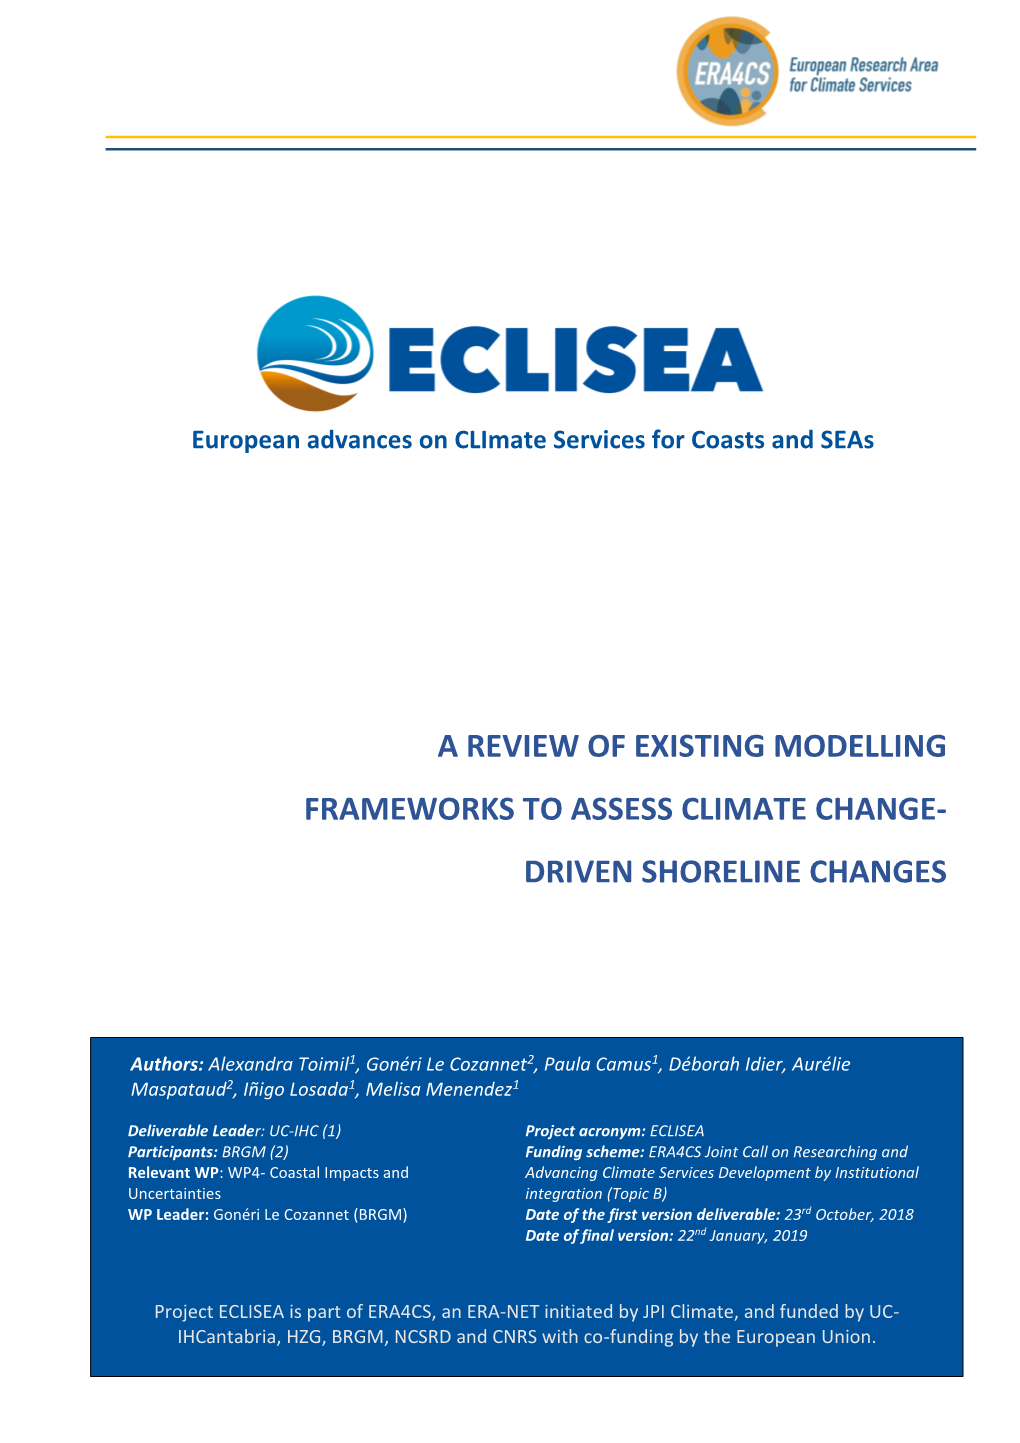 A Review of Existing Modelling Frameworks to Assess Climate Change